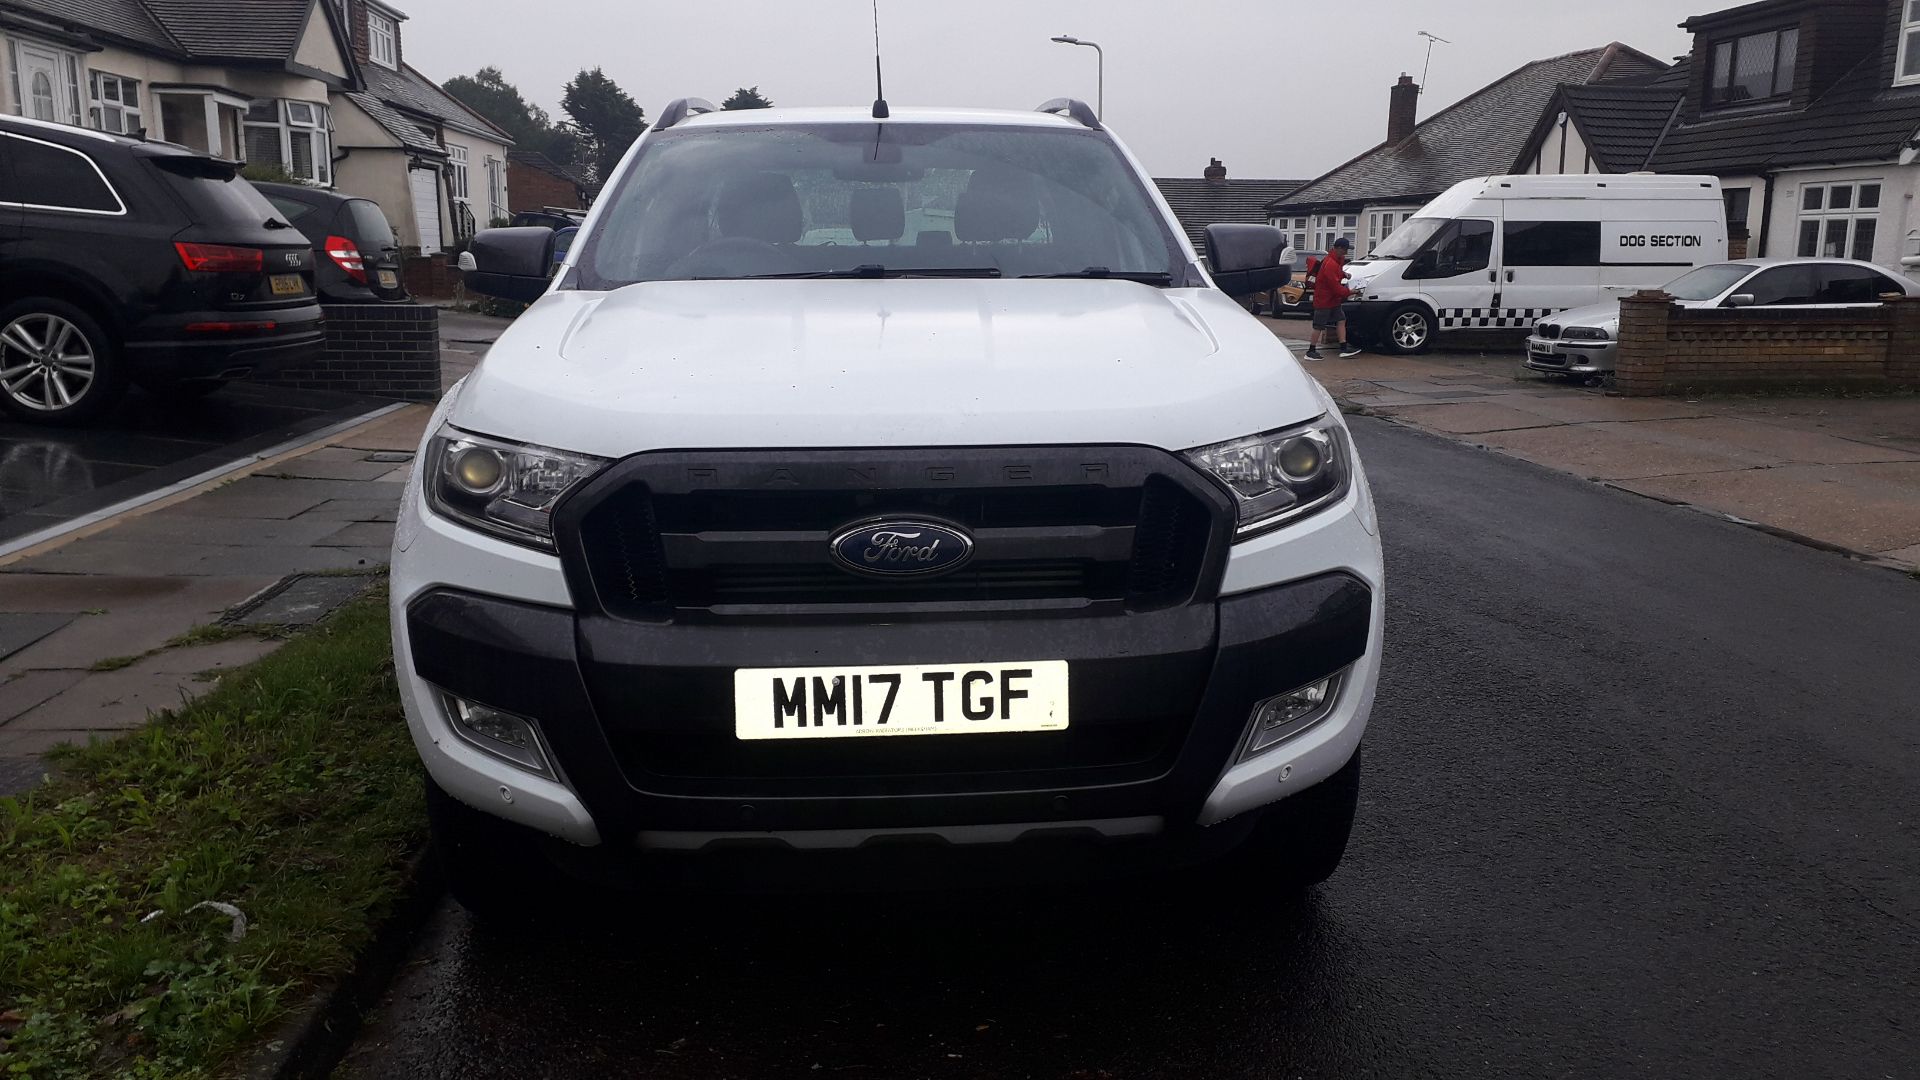 Ford Ranger Wildtrak 3.2 TDCi 200 Auto Double Cab Pick Up (2017) - Image 2 of 26